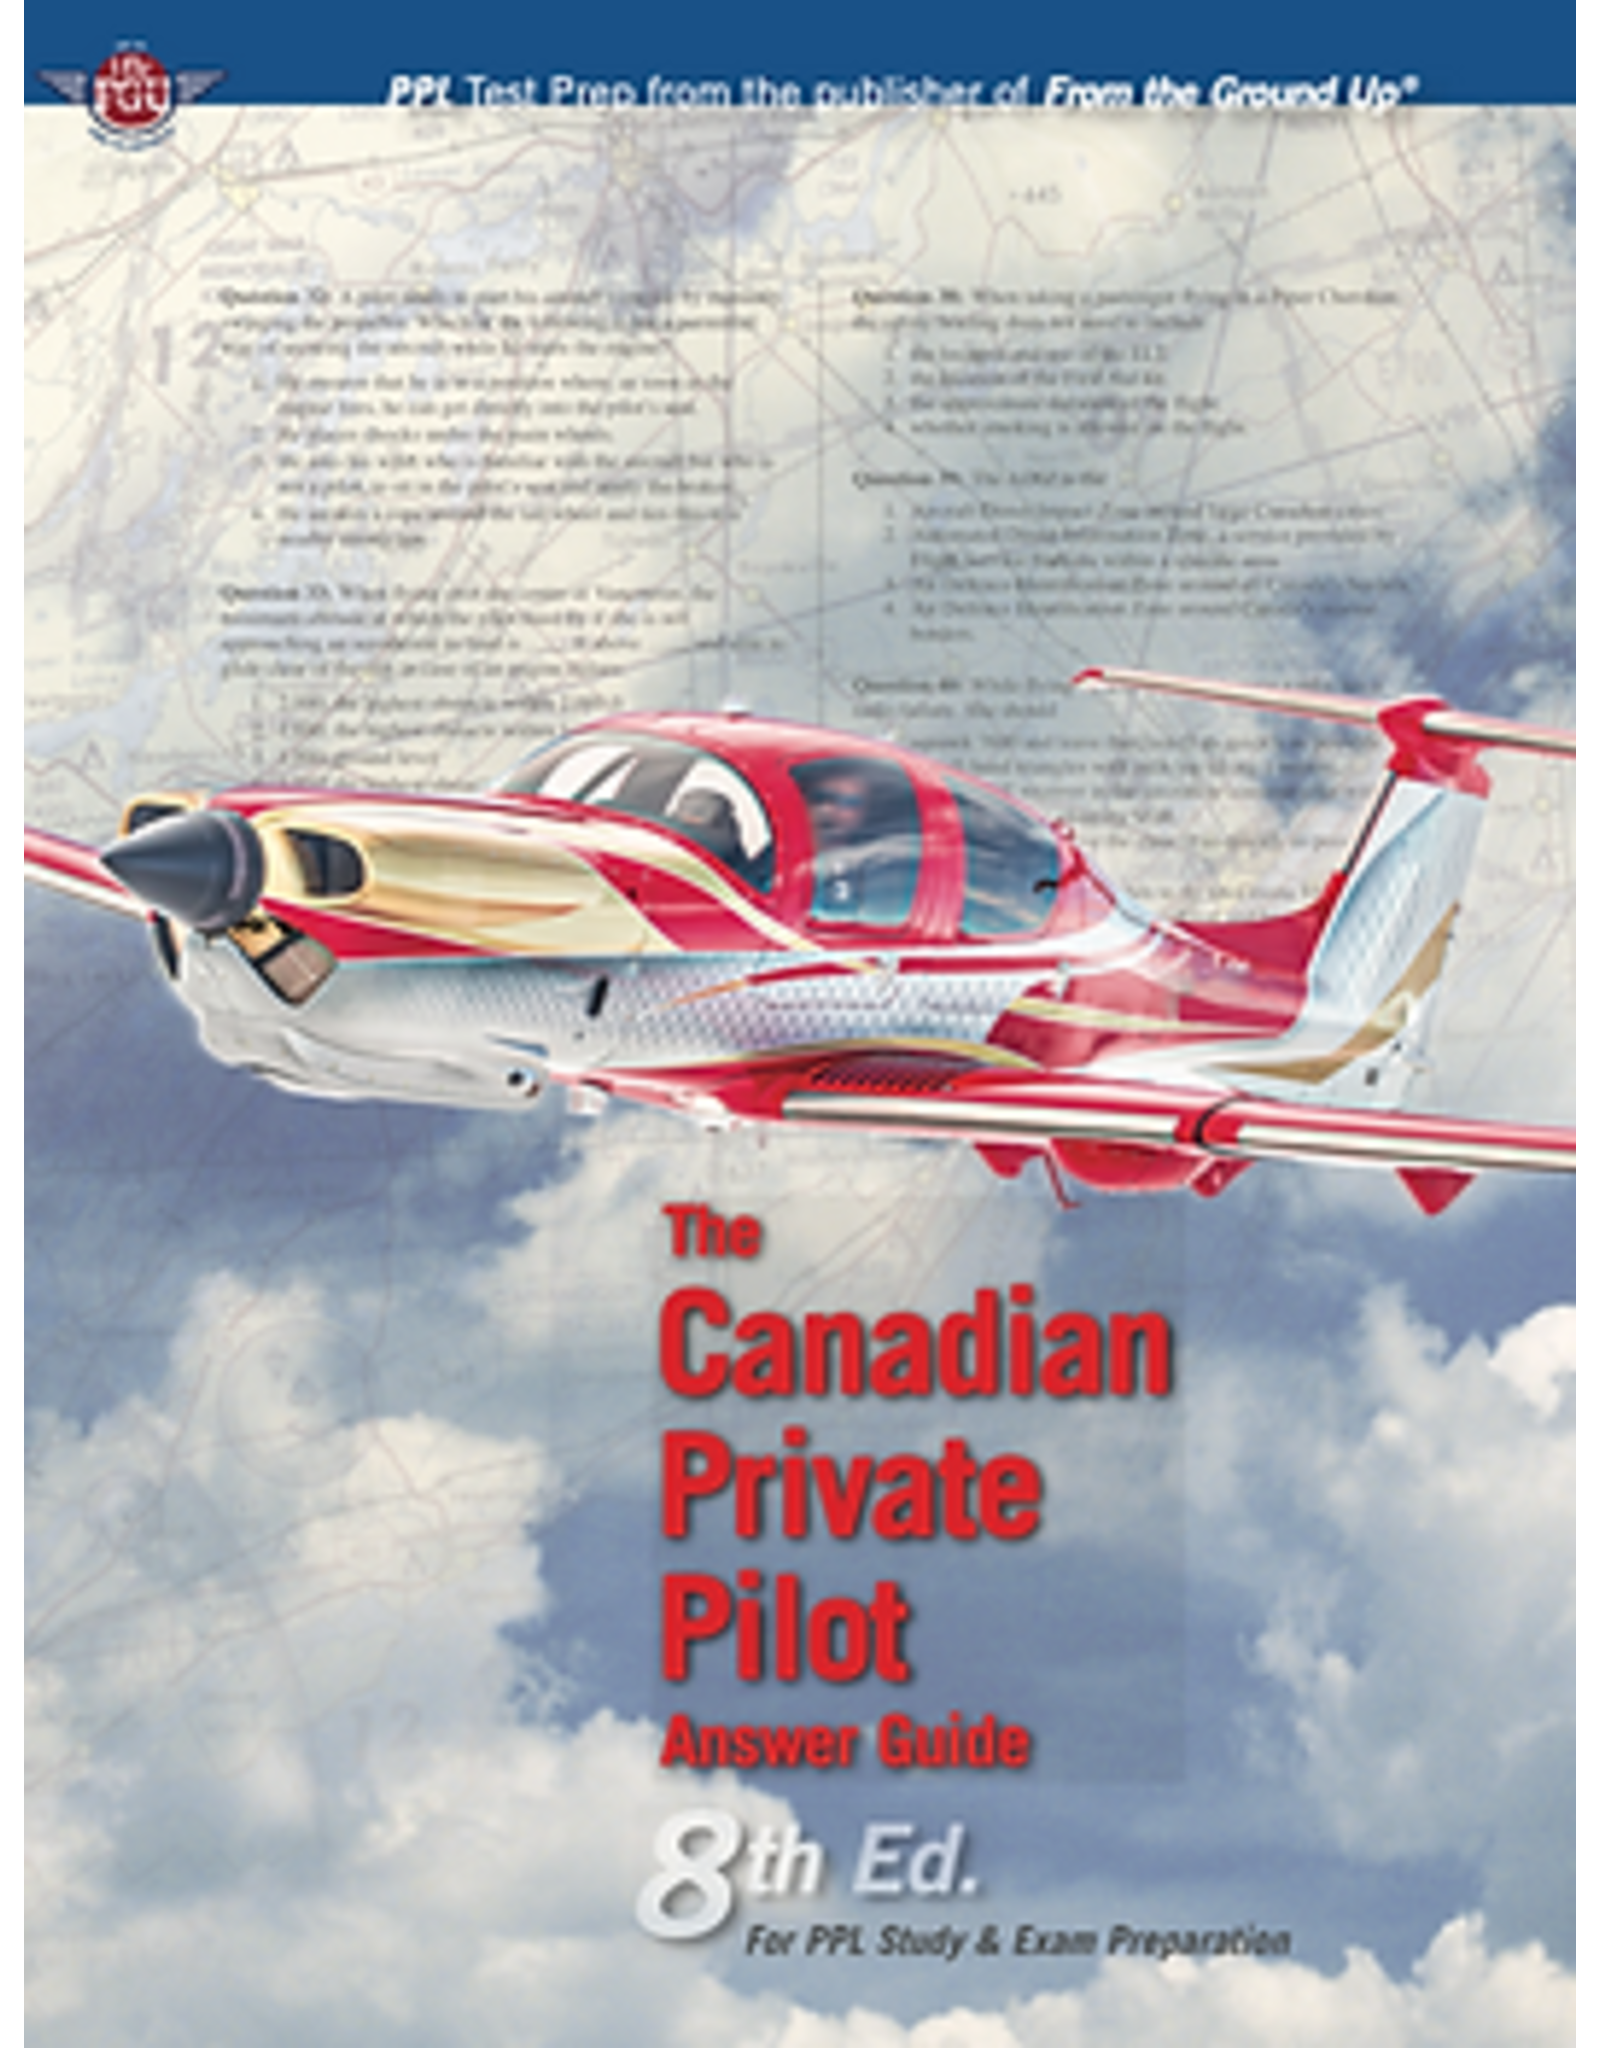 Canadian Private Pilot Answer Guide 8th Ed.